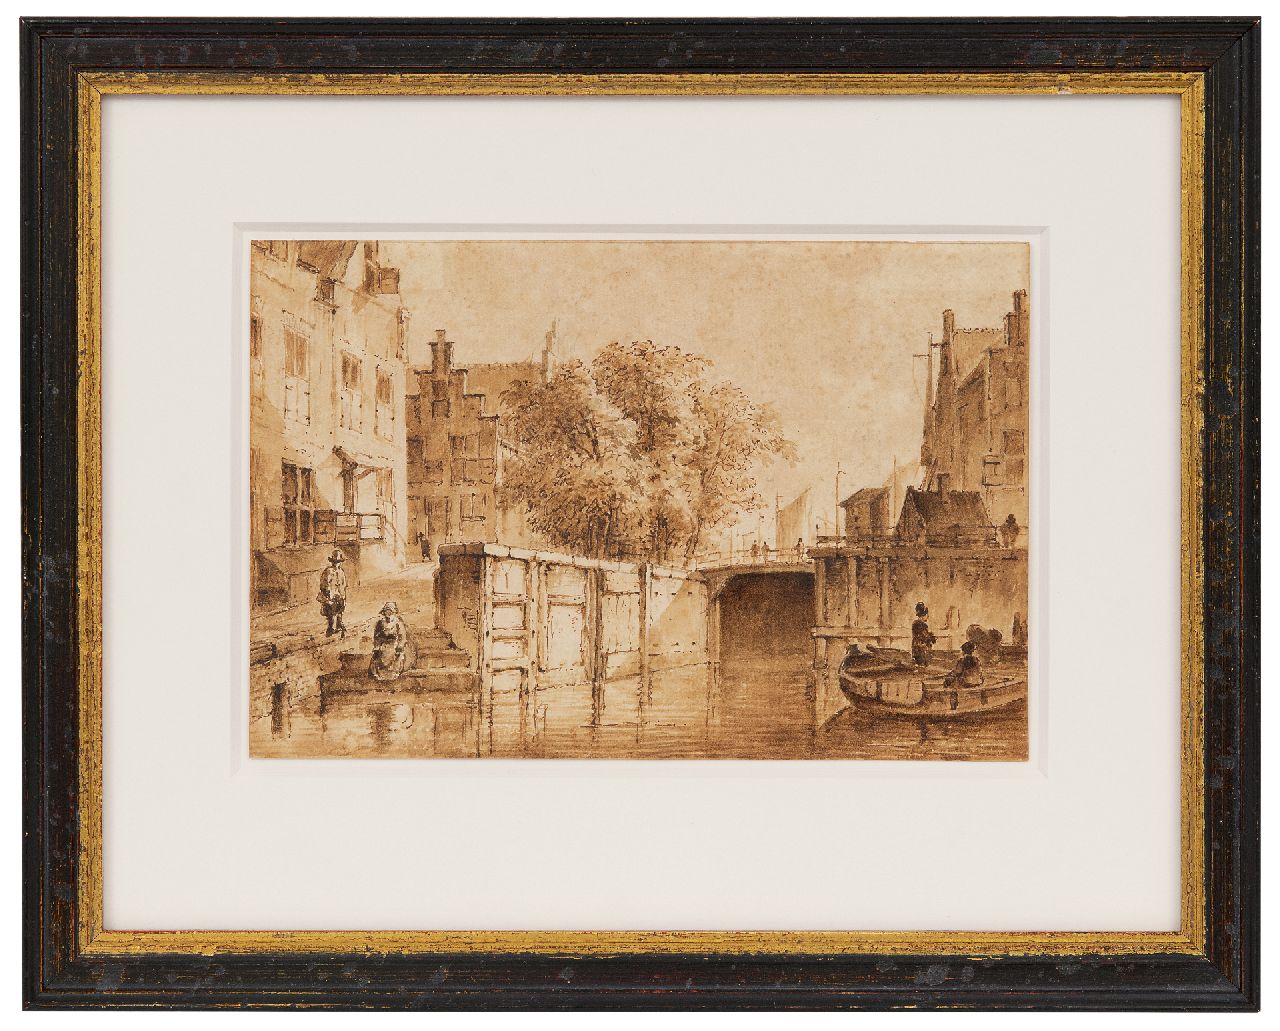 Westenberg G.P.  | George Pieter Westenberg, The Oude Haarlemmersluis, direction Martelaarsgracht, Amsterdam, pen, brush and ink on paper 11.8 x 17.4 cm, signed on the reverse and dated 1822